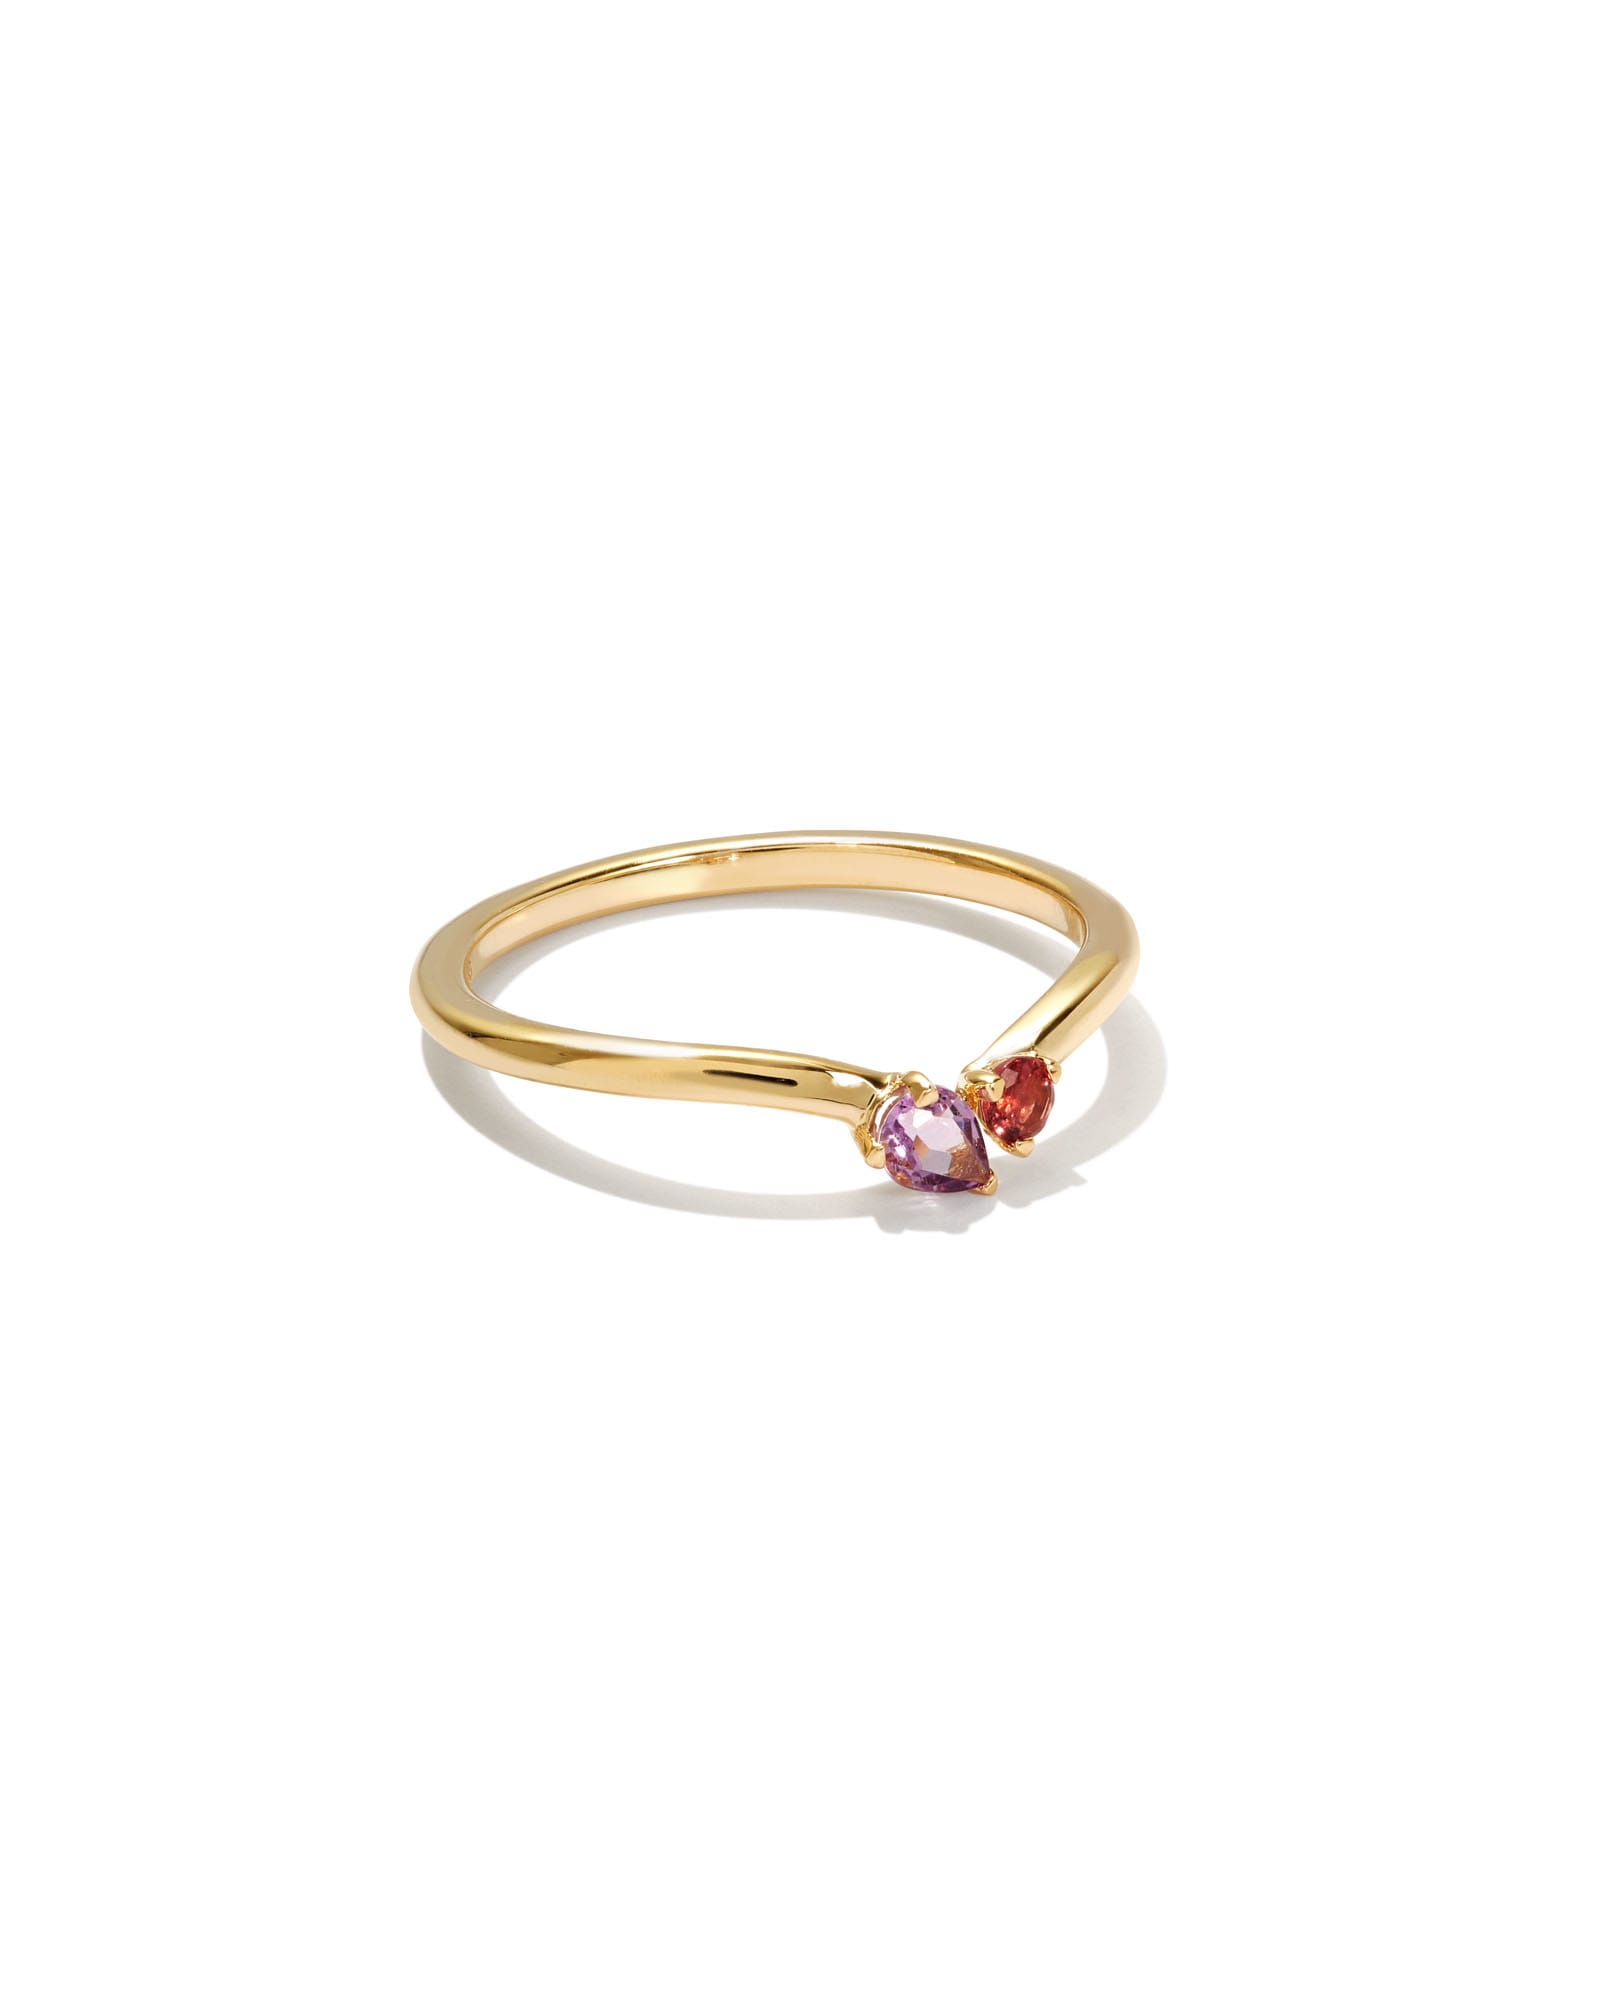 Toi et Moi 14k Yellow Gold Band Ring Light Pink Sapphire and Tourmaline